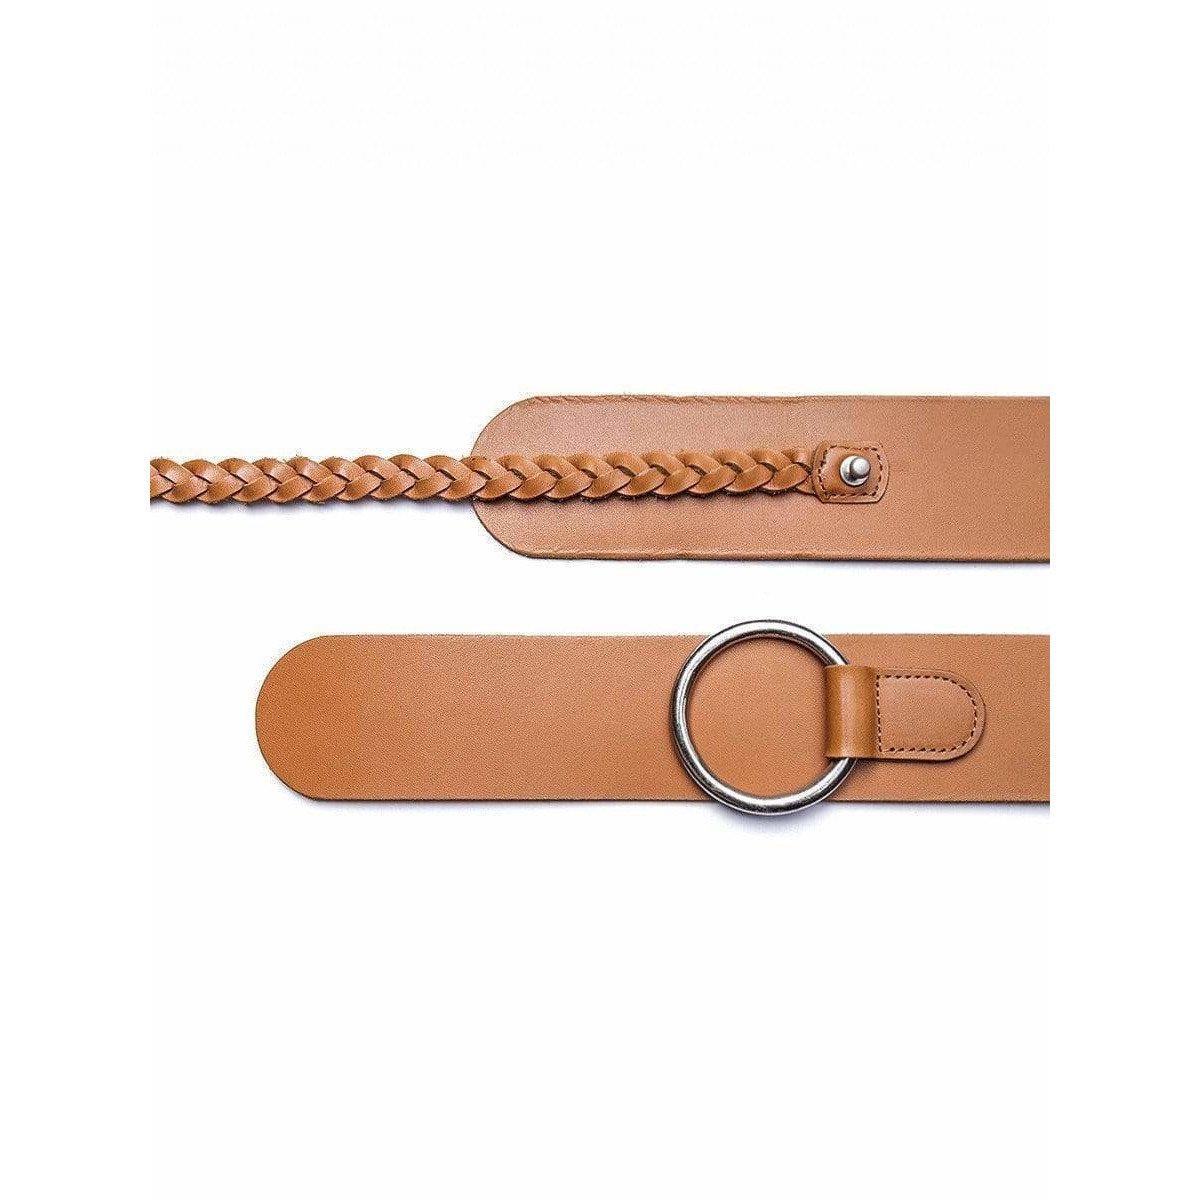 This wide leather belt is classic and versatile in tan with silver ring hardware and beautiful braided detail from vintage Junya Watanabe.
